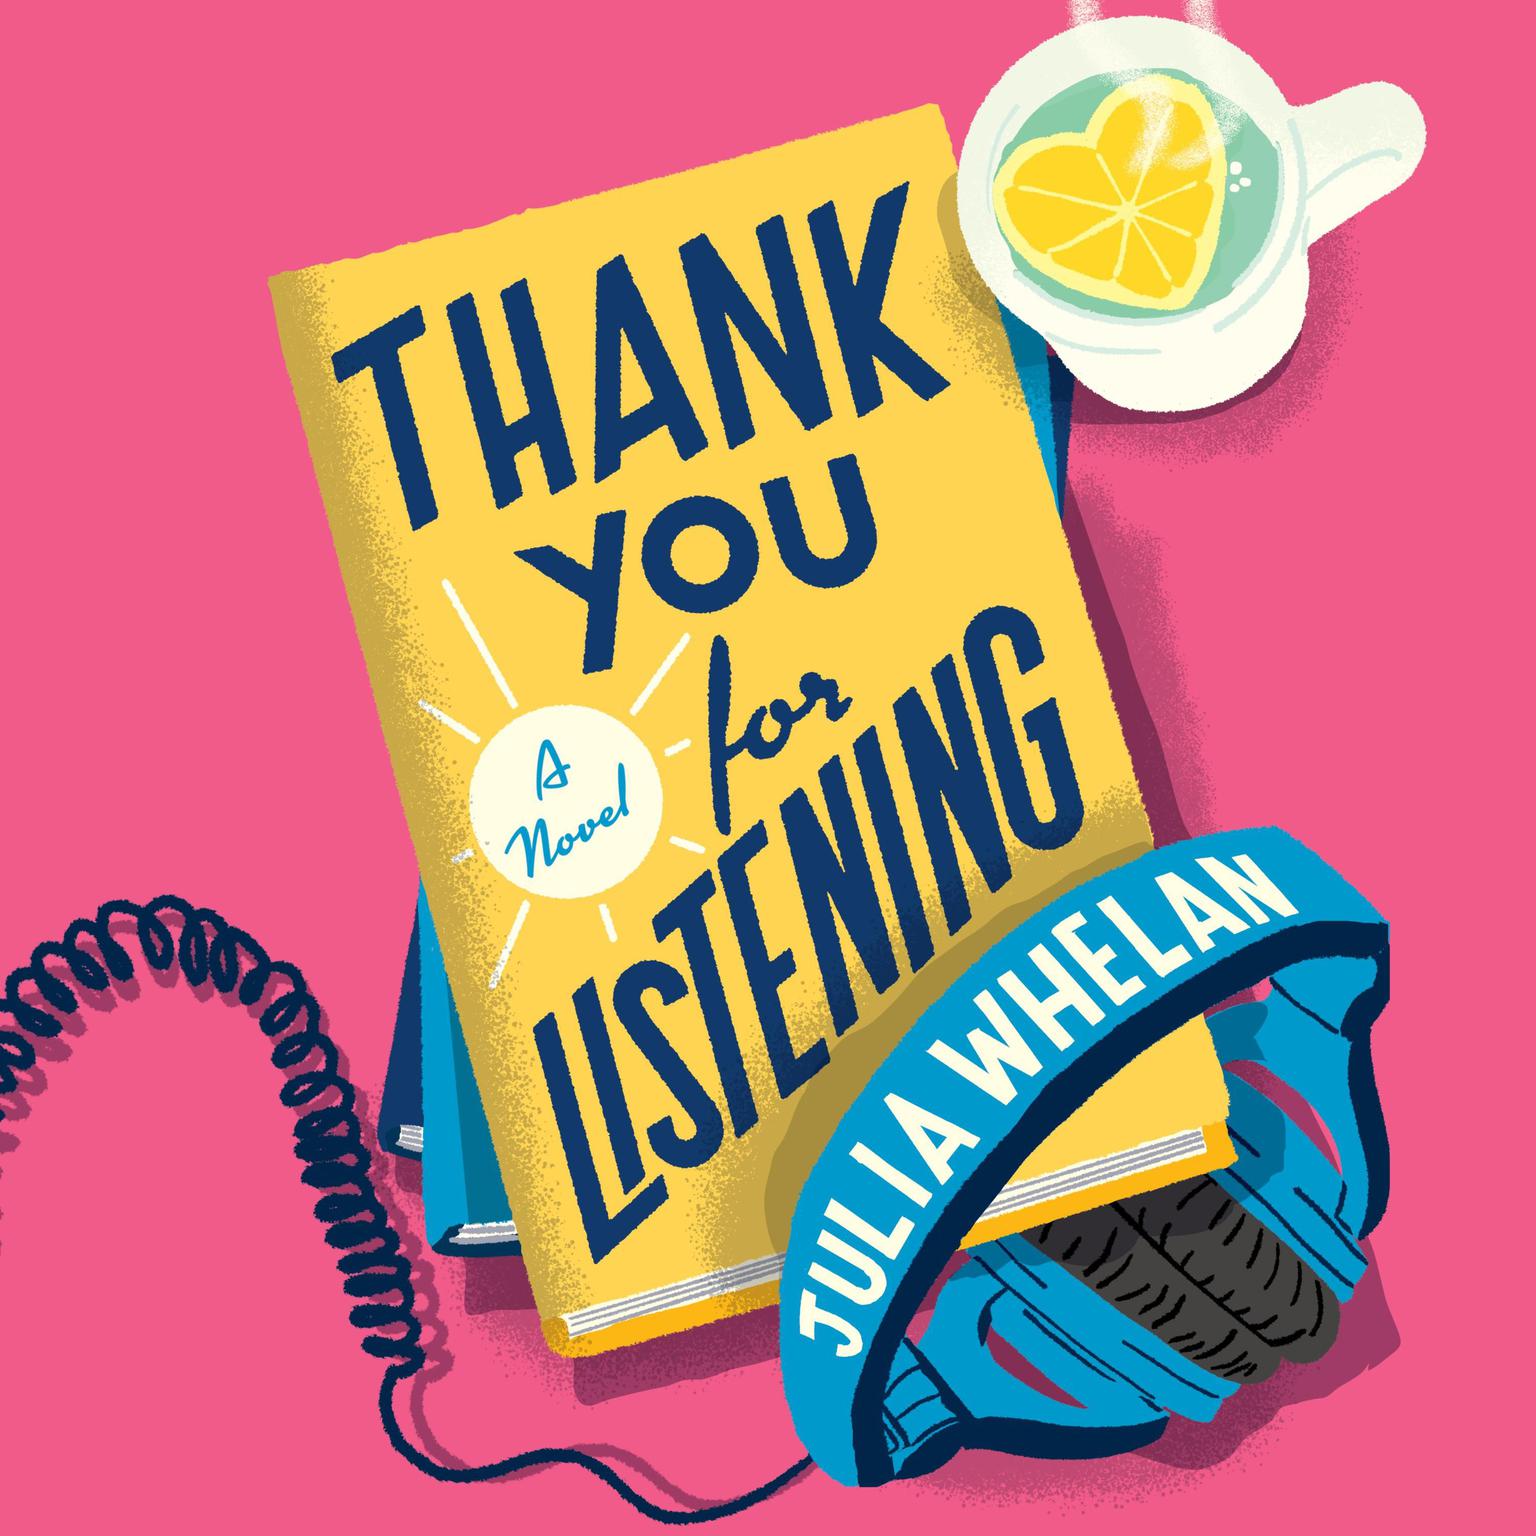 Thank You for Listening (2022, HarperCollins Publishers)